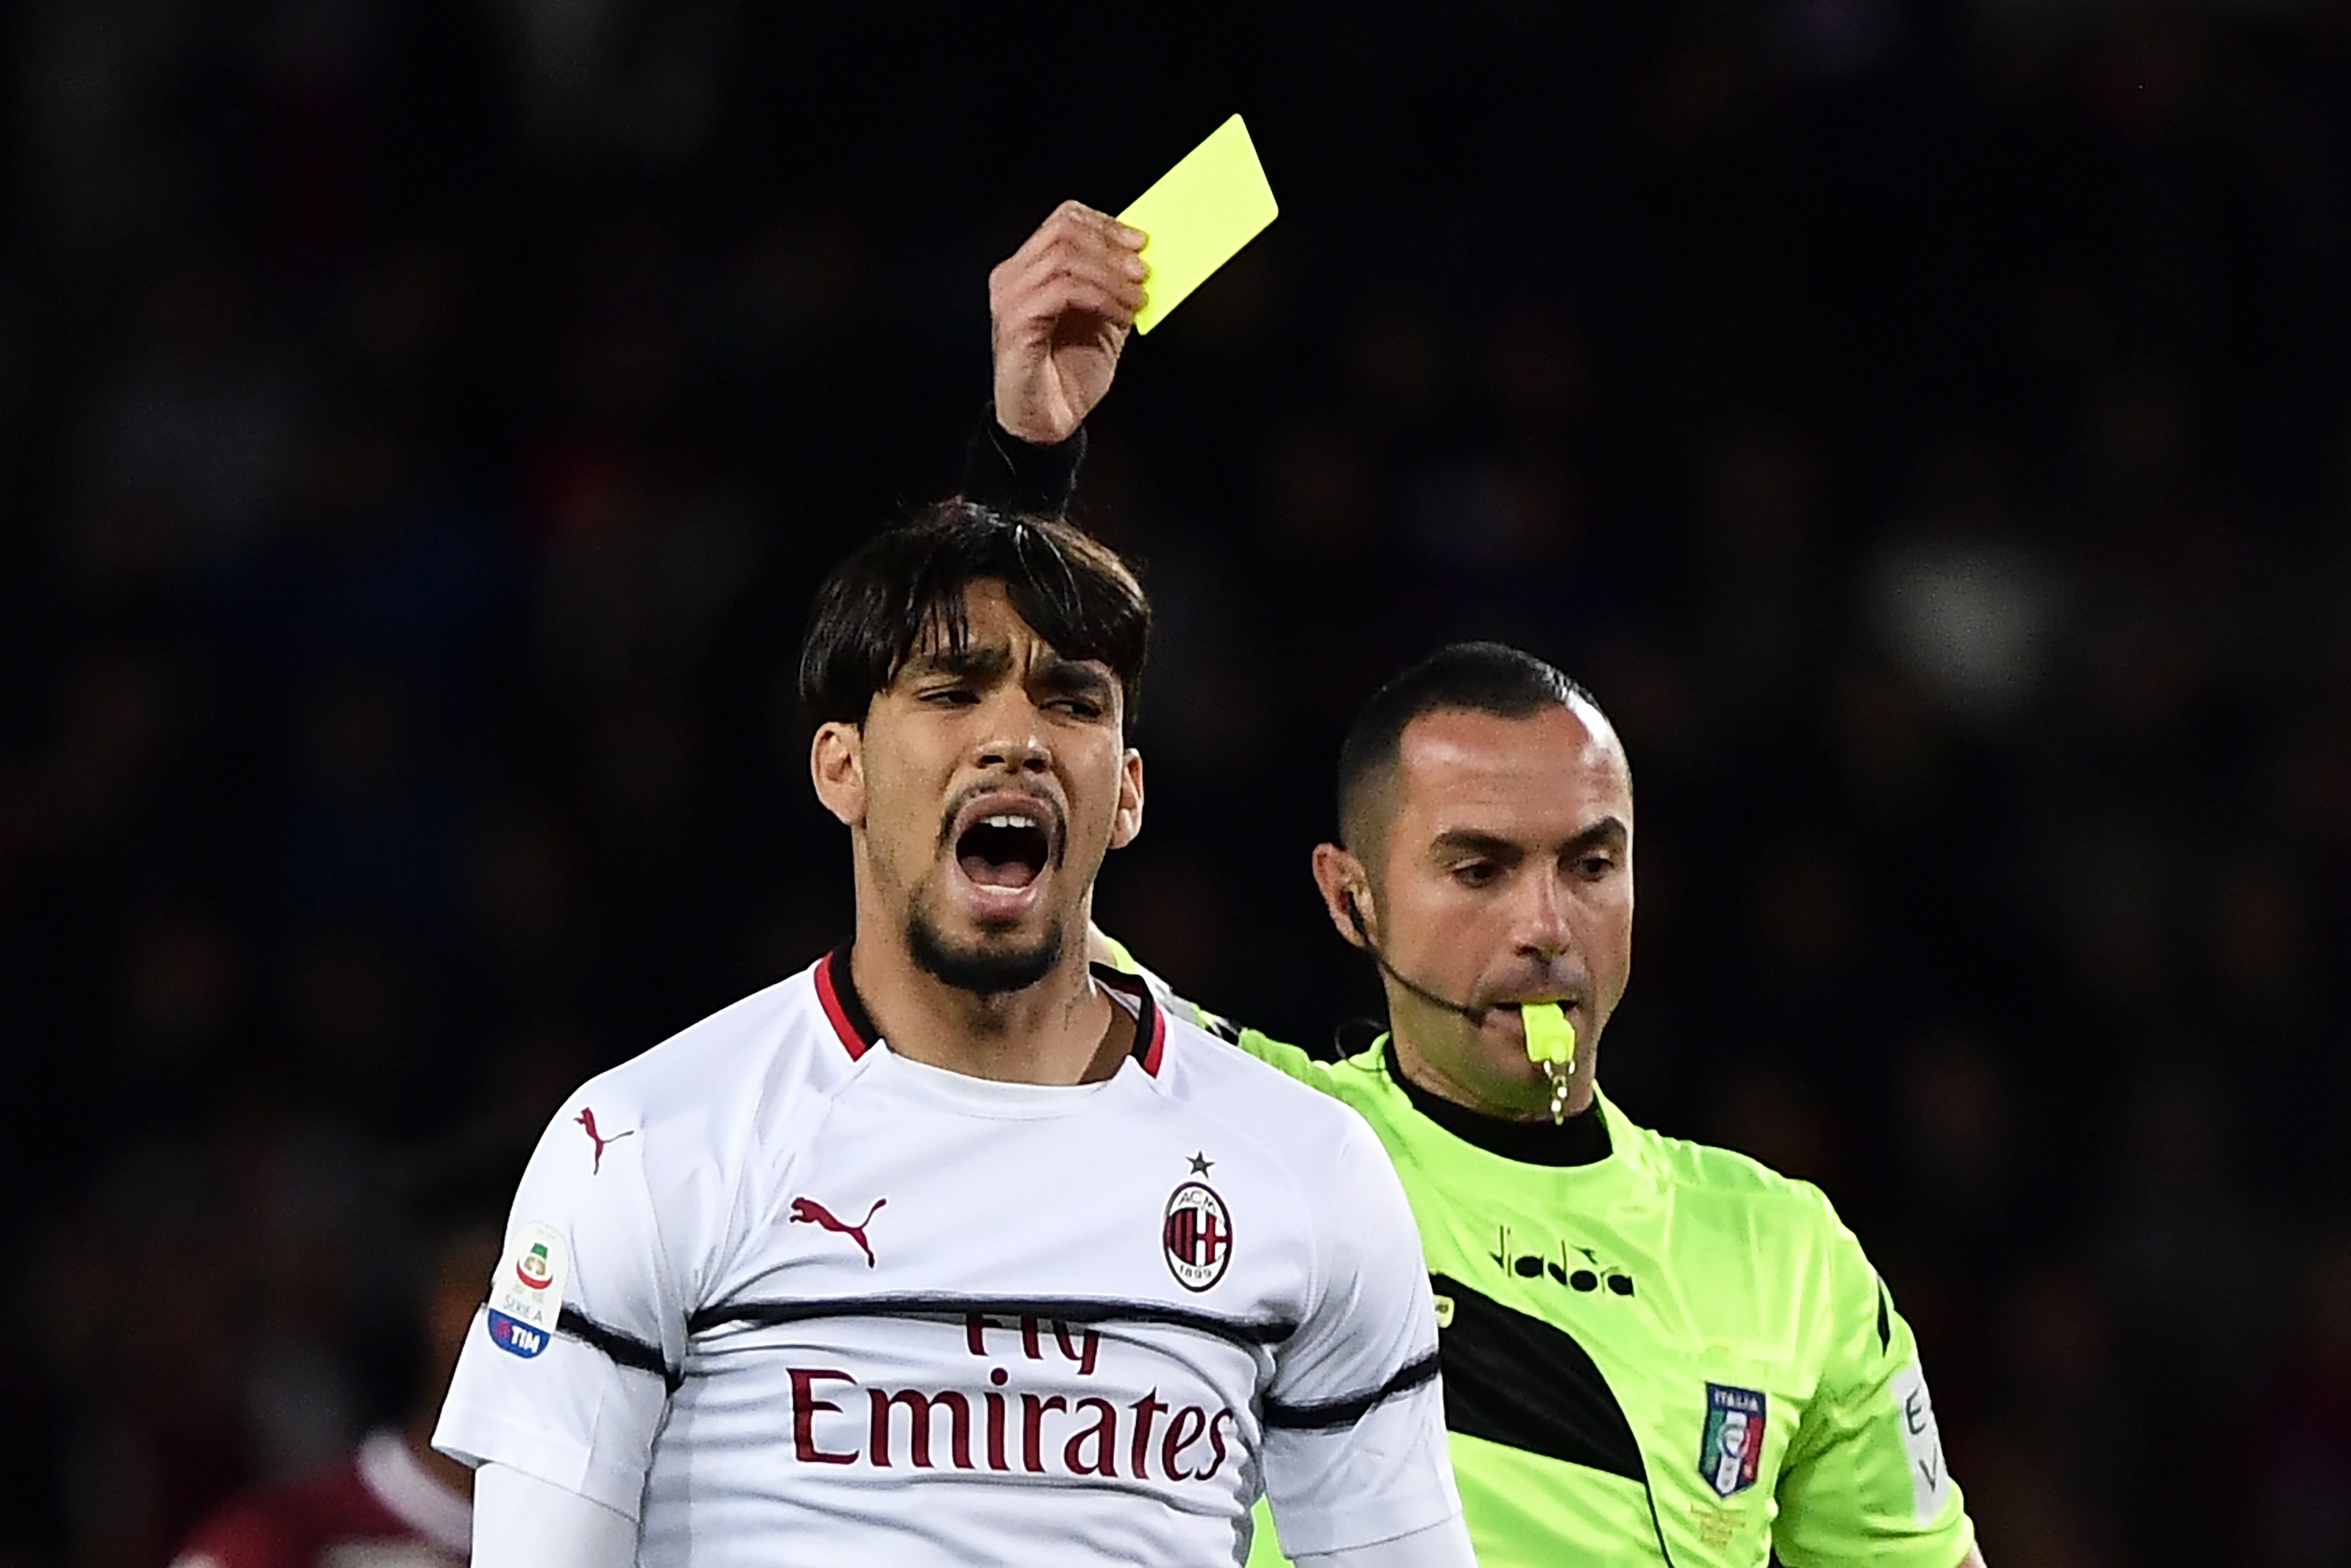 Referee Marco Guida gives a yellow card to AC Milan's Brazilian midfielder Lucas Paqueta during the Italian Serie A football match between Torino and AC Milan on April 28, 2019 at the Grande Torino stadium in Turin. (Photo by MARCO BERTORELLO / AFP)        (Photo credit should read MARCO BERTORELLO/AFP/Getty Images)